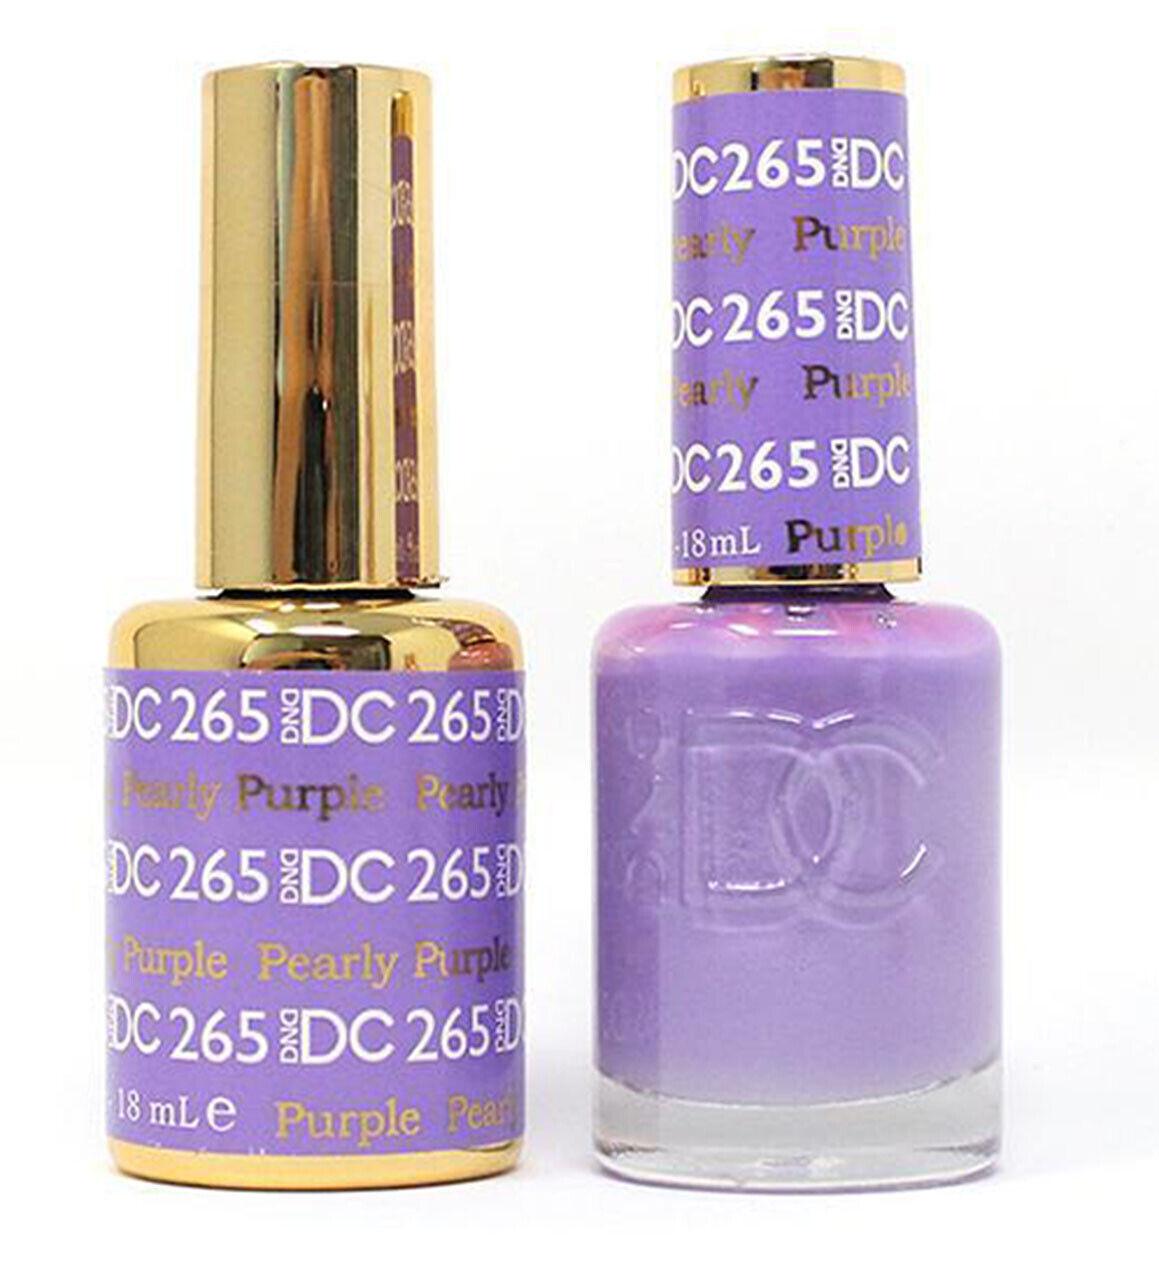 DND DC - Gel Polish & Matching Nail Lacquer Set - #265 PEARLY PURPLE